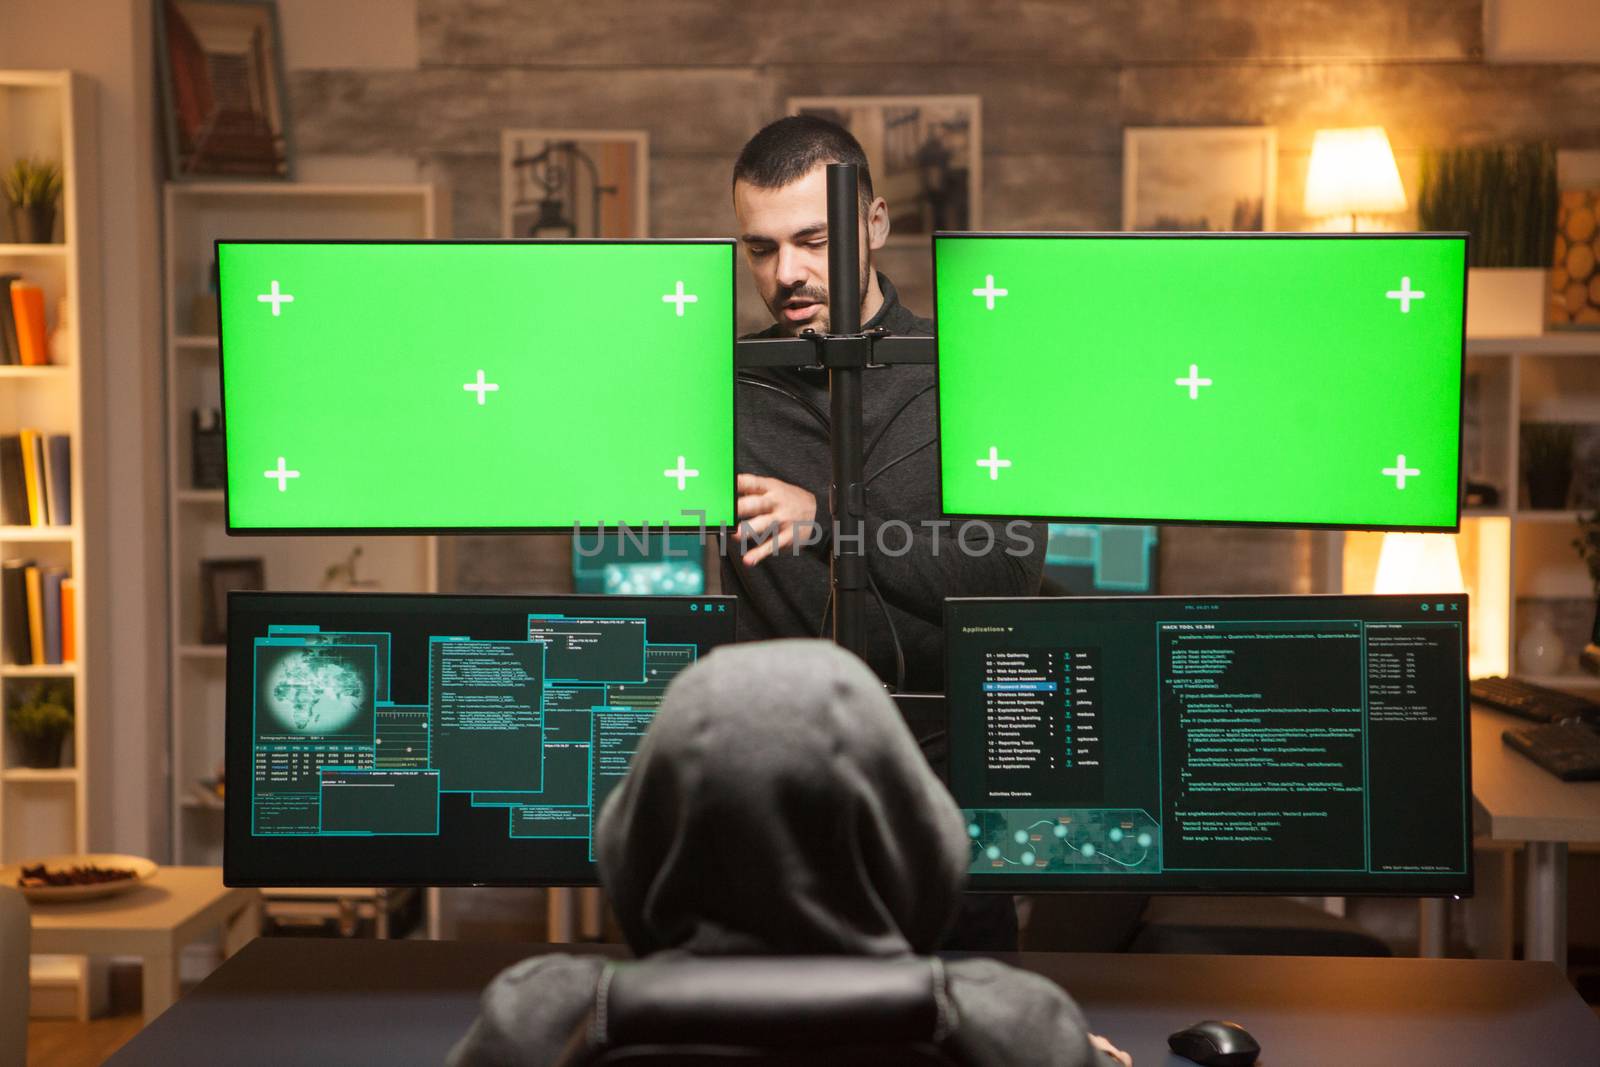 Back view team of hackers doying cyber attacks in front of computer with green screens.